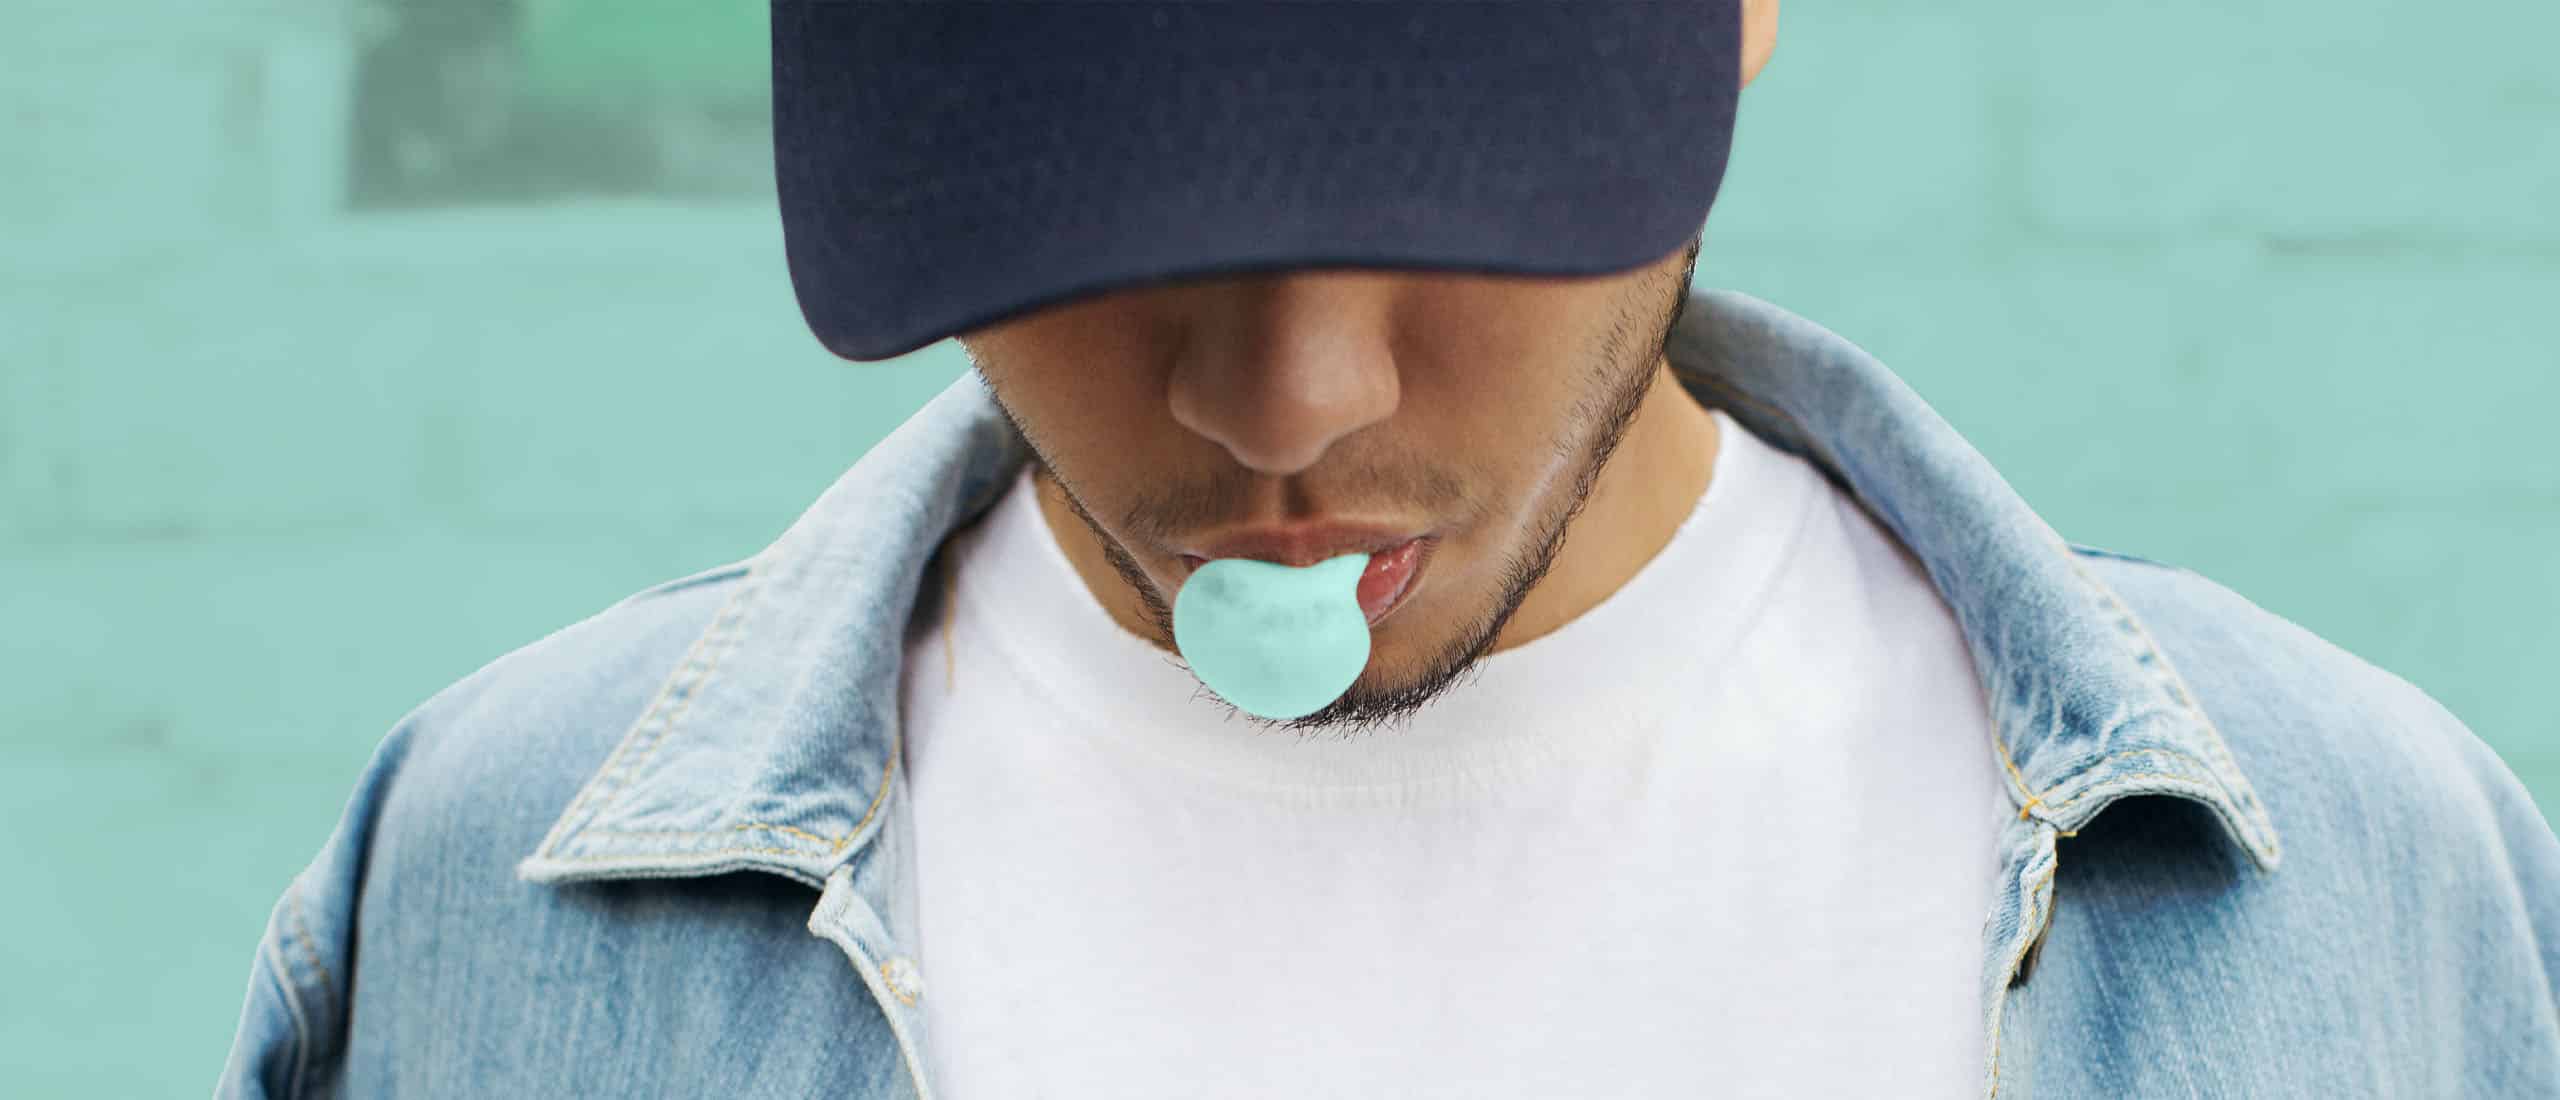 Man chewing gum and blowing bubble